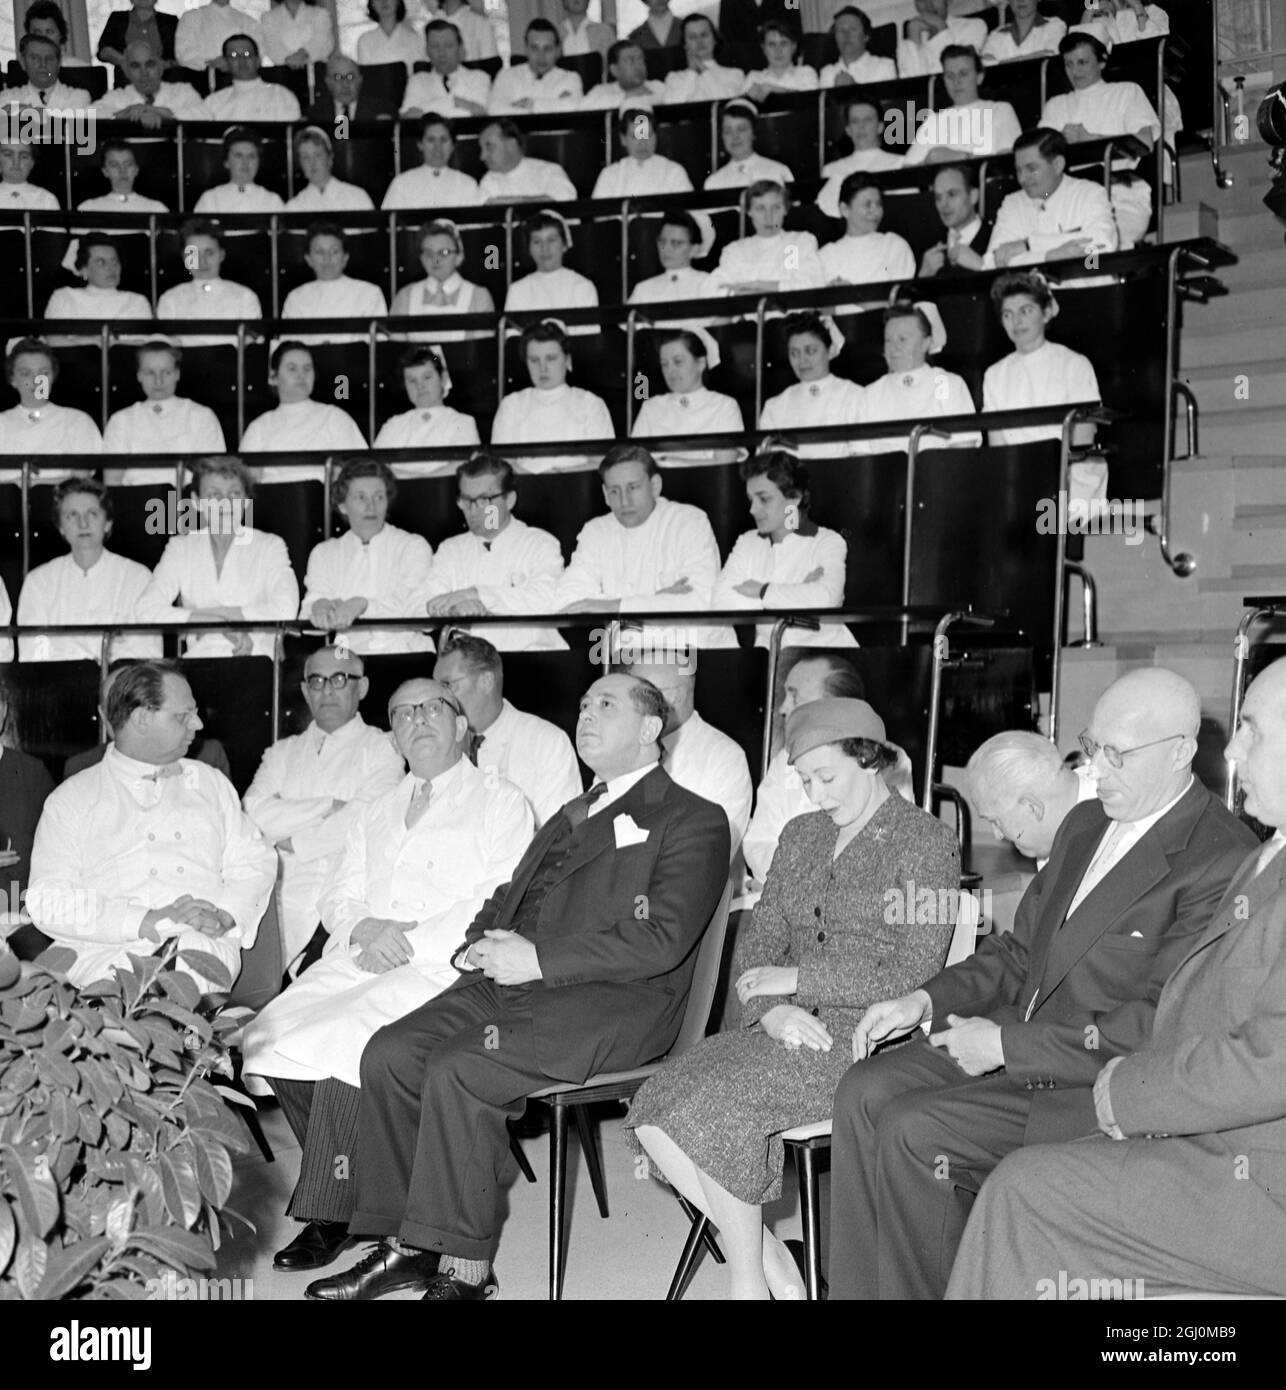 First Row Left to Right Professor Mauer Dr Herbert Gunter Kuhne the director of the hospital Lord Mayor Leslie Lever of Manchester England and his wife Mrs Lever and Mr Hamm municipal director of the Munich Hospital 12 March 1958 Stock Photo